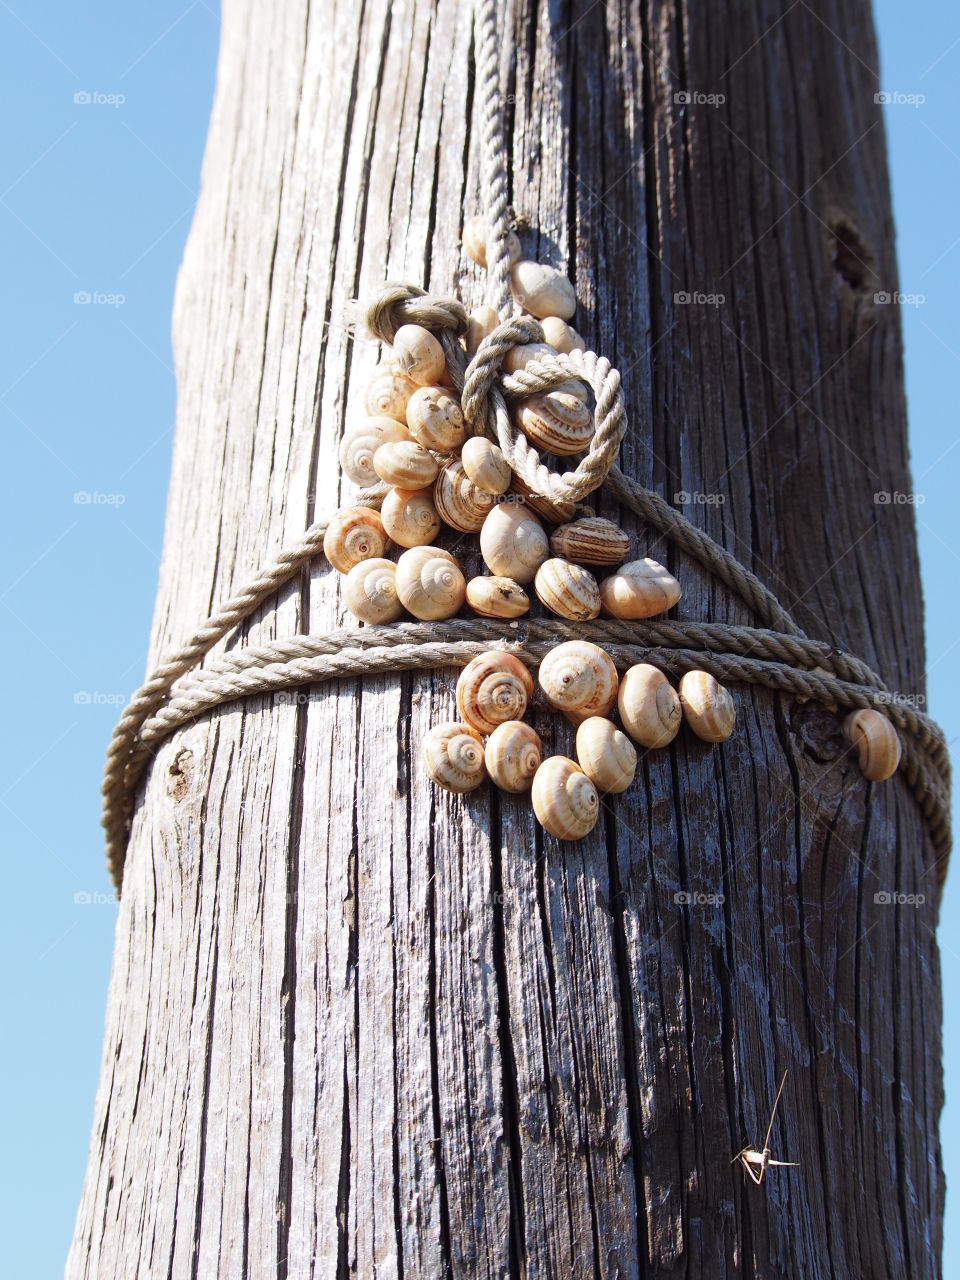 Close-up of snails on tree trunk